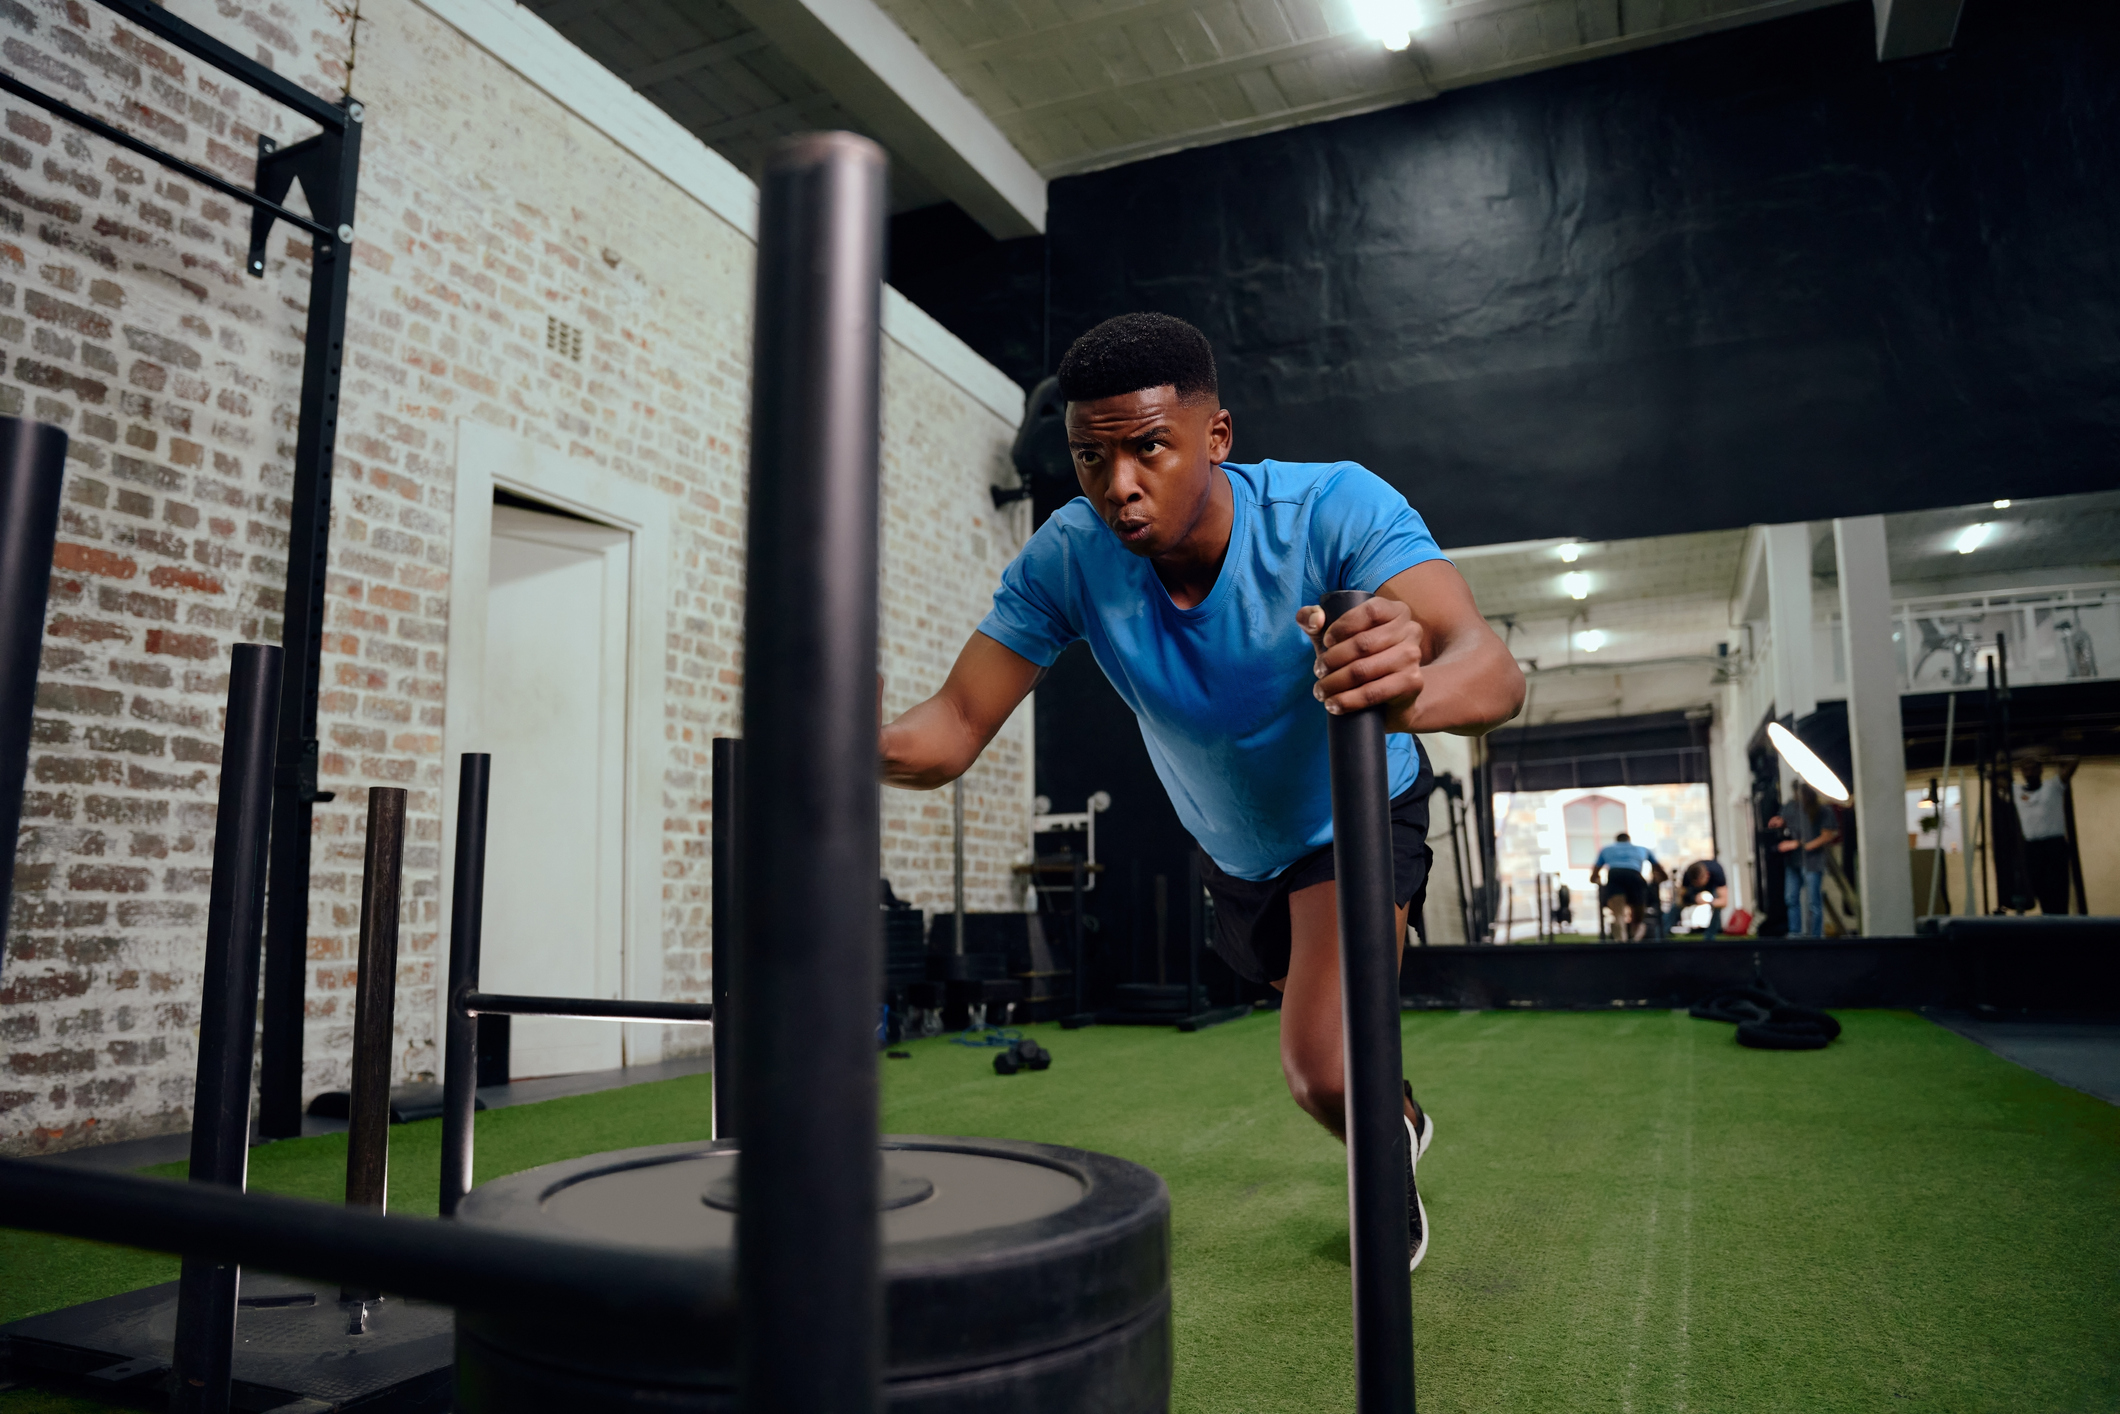 A young black man is doing a sled push exercise at the gym.